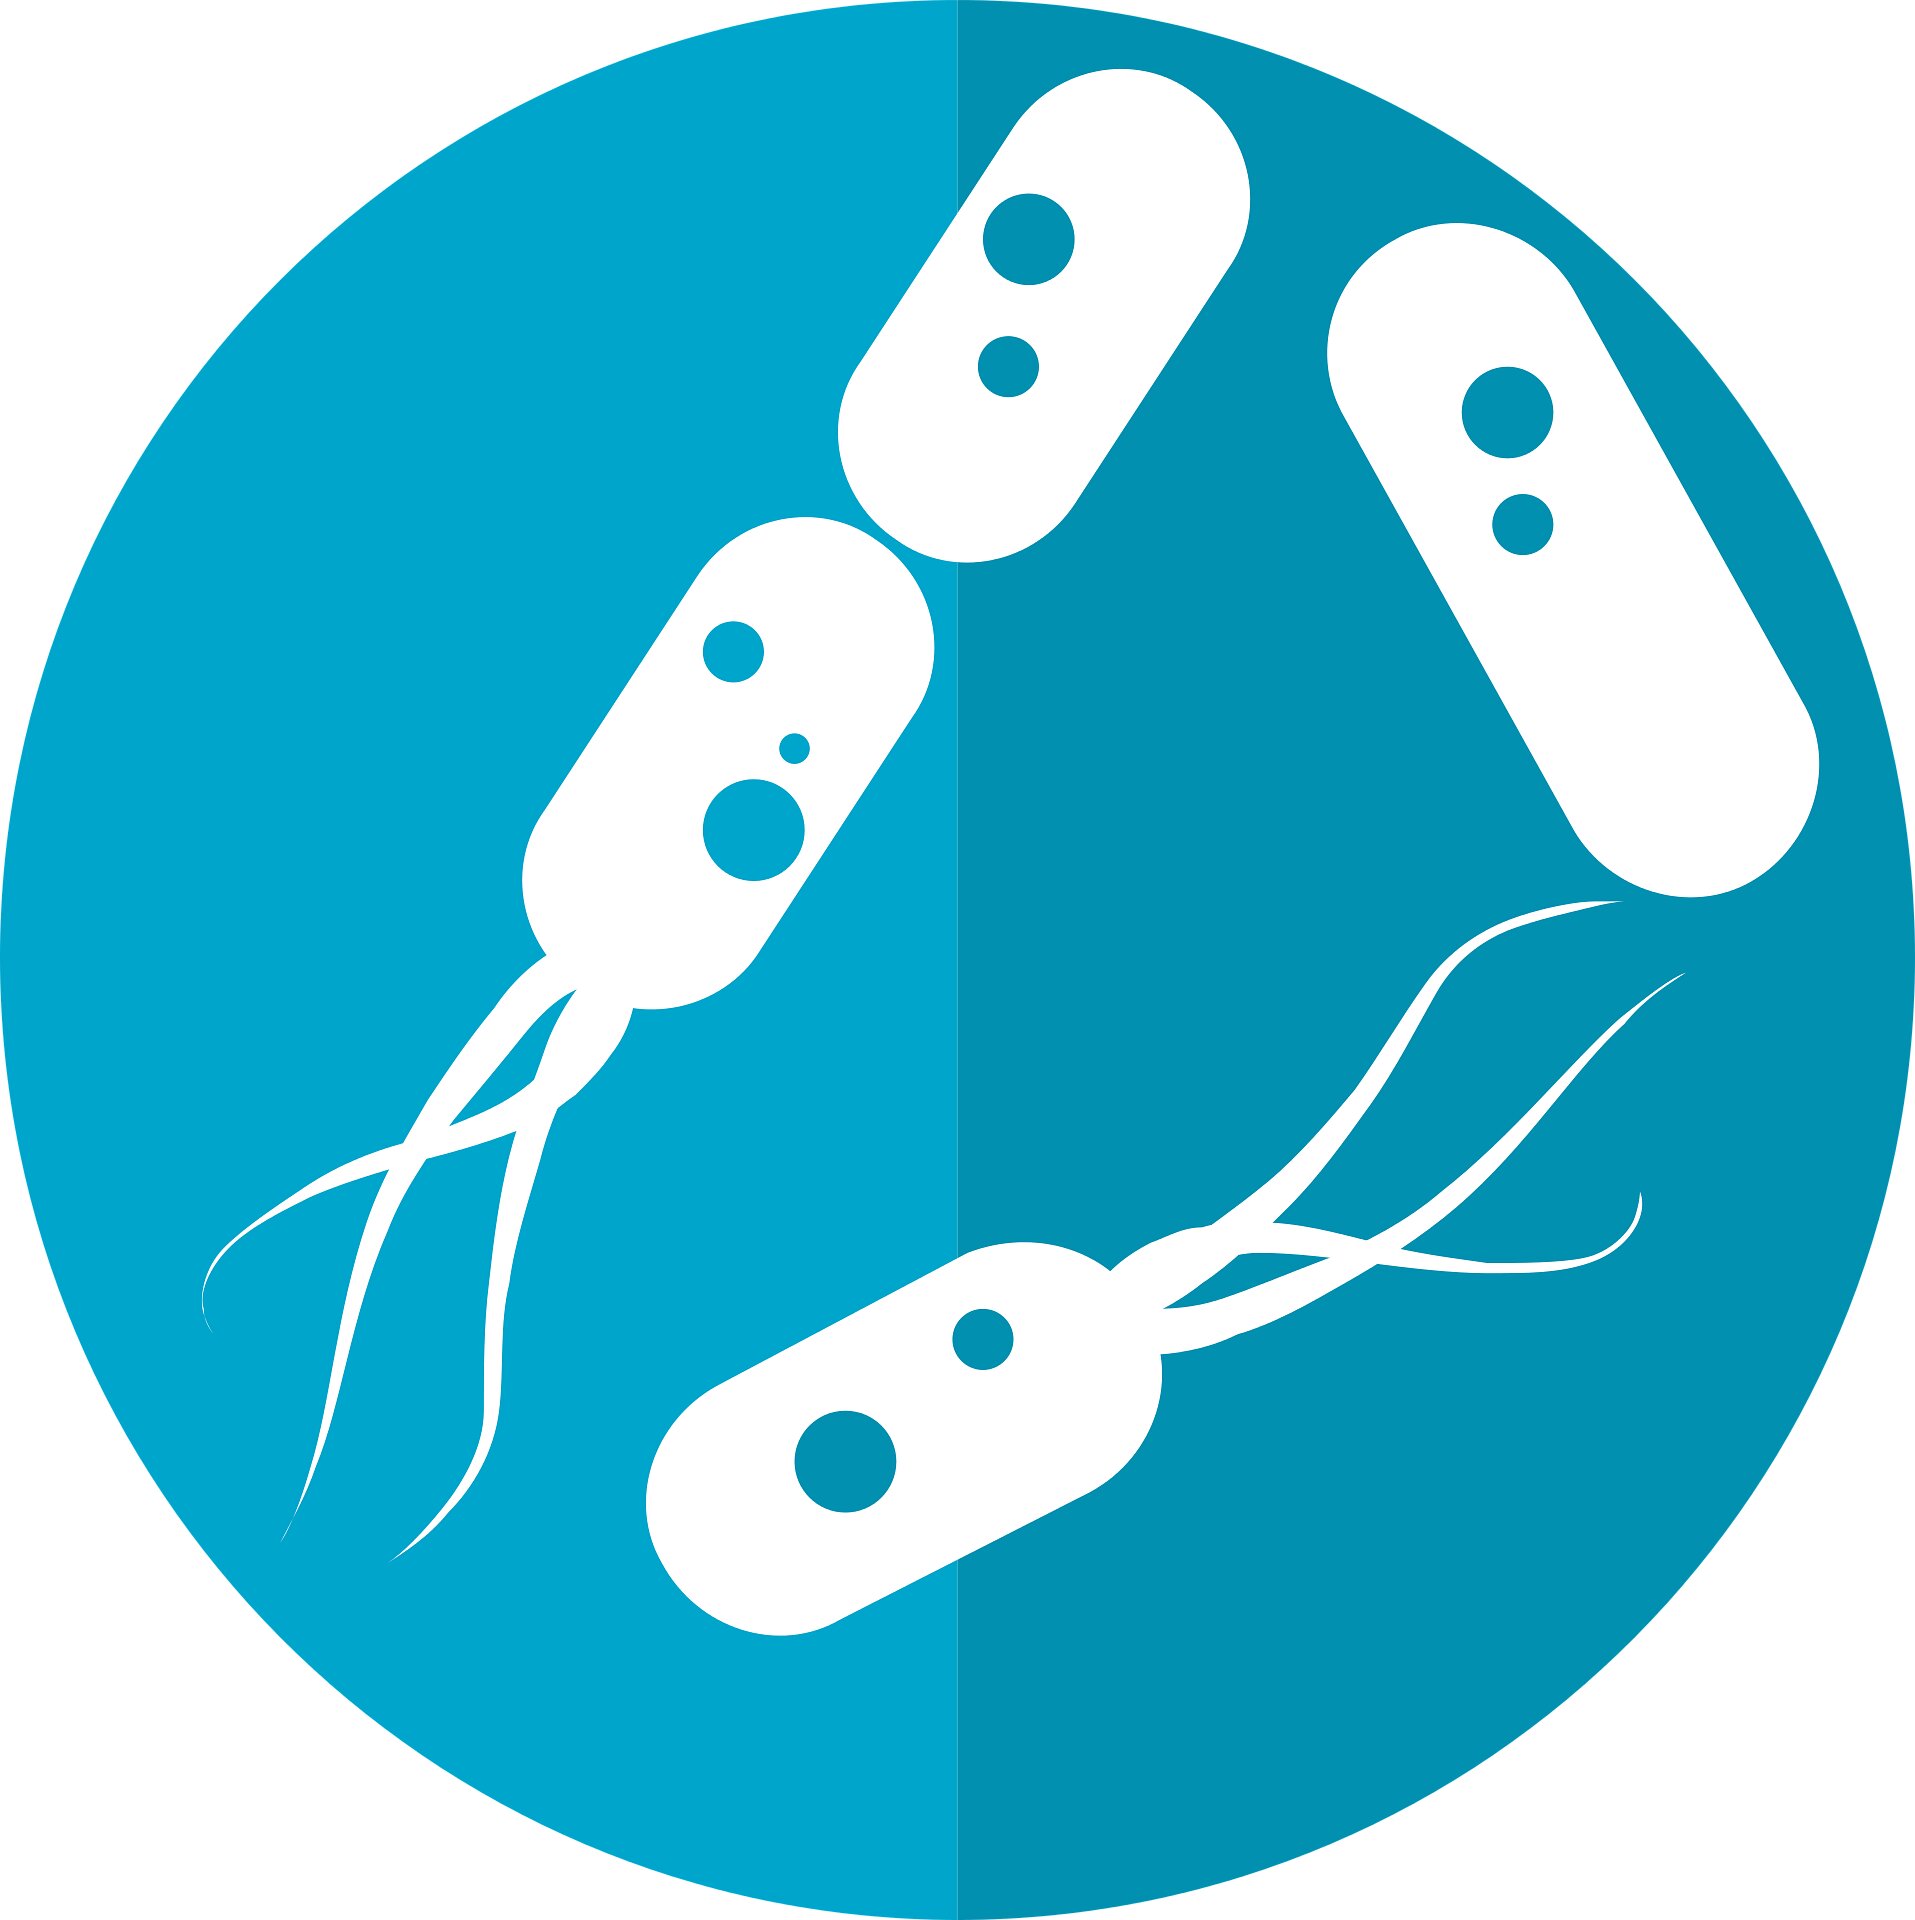 Study finds probiotic supplement helps to form a mature microbiome in extremely preterm infants